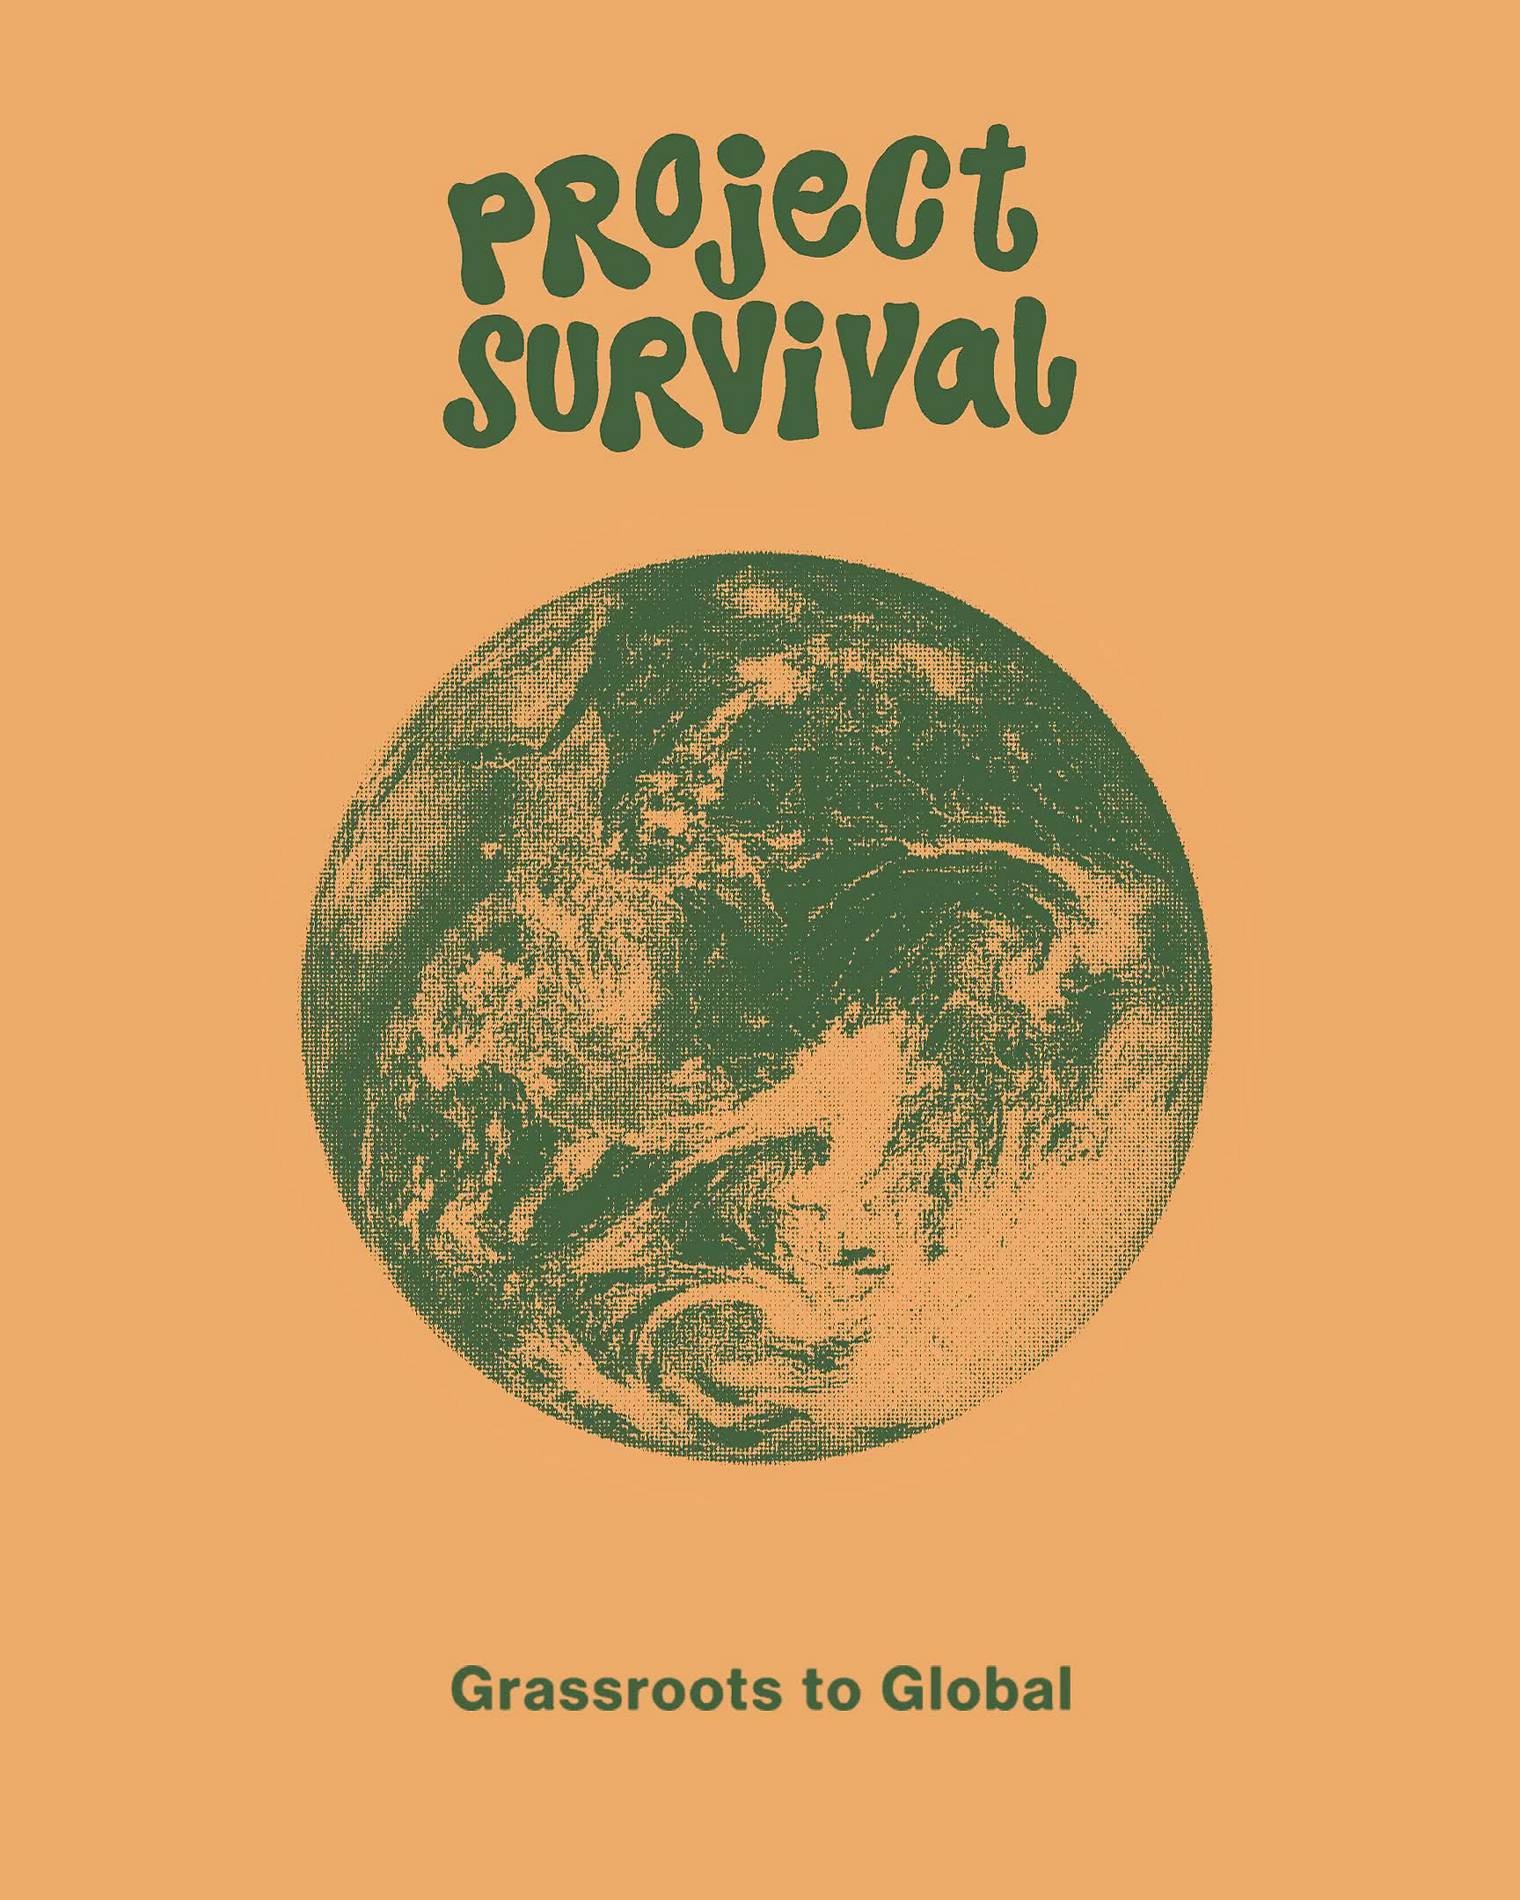 Illustrative Globe Spinning with Project Survival type at top